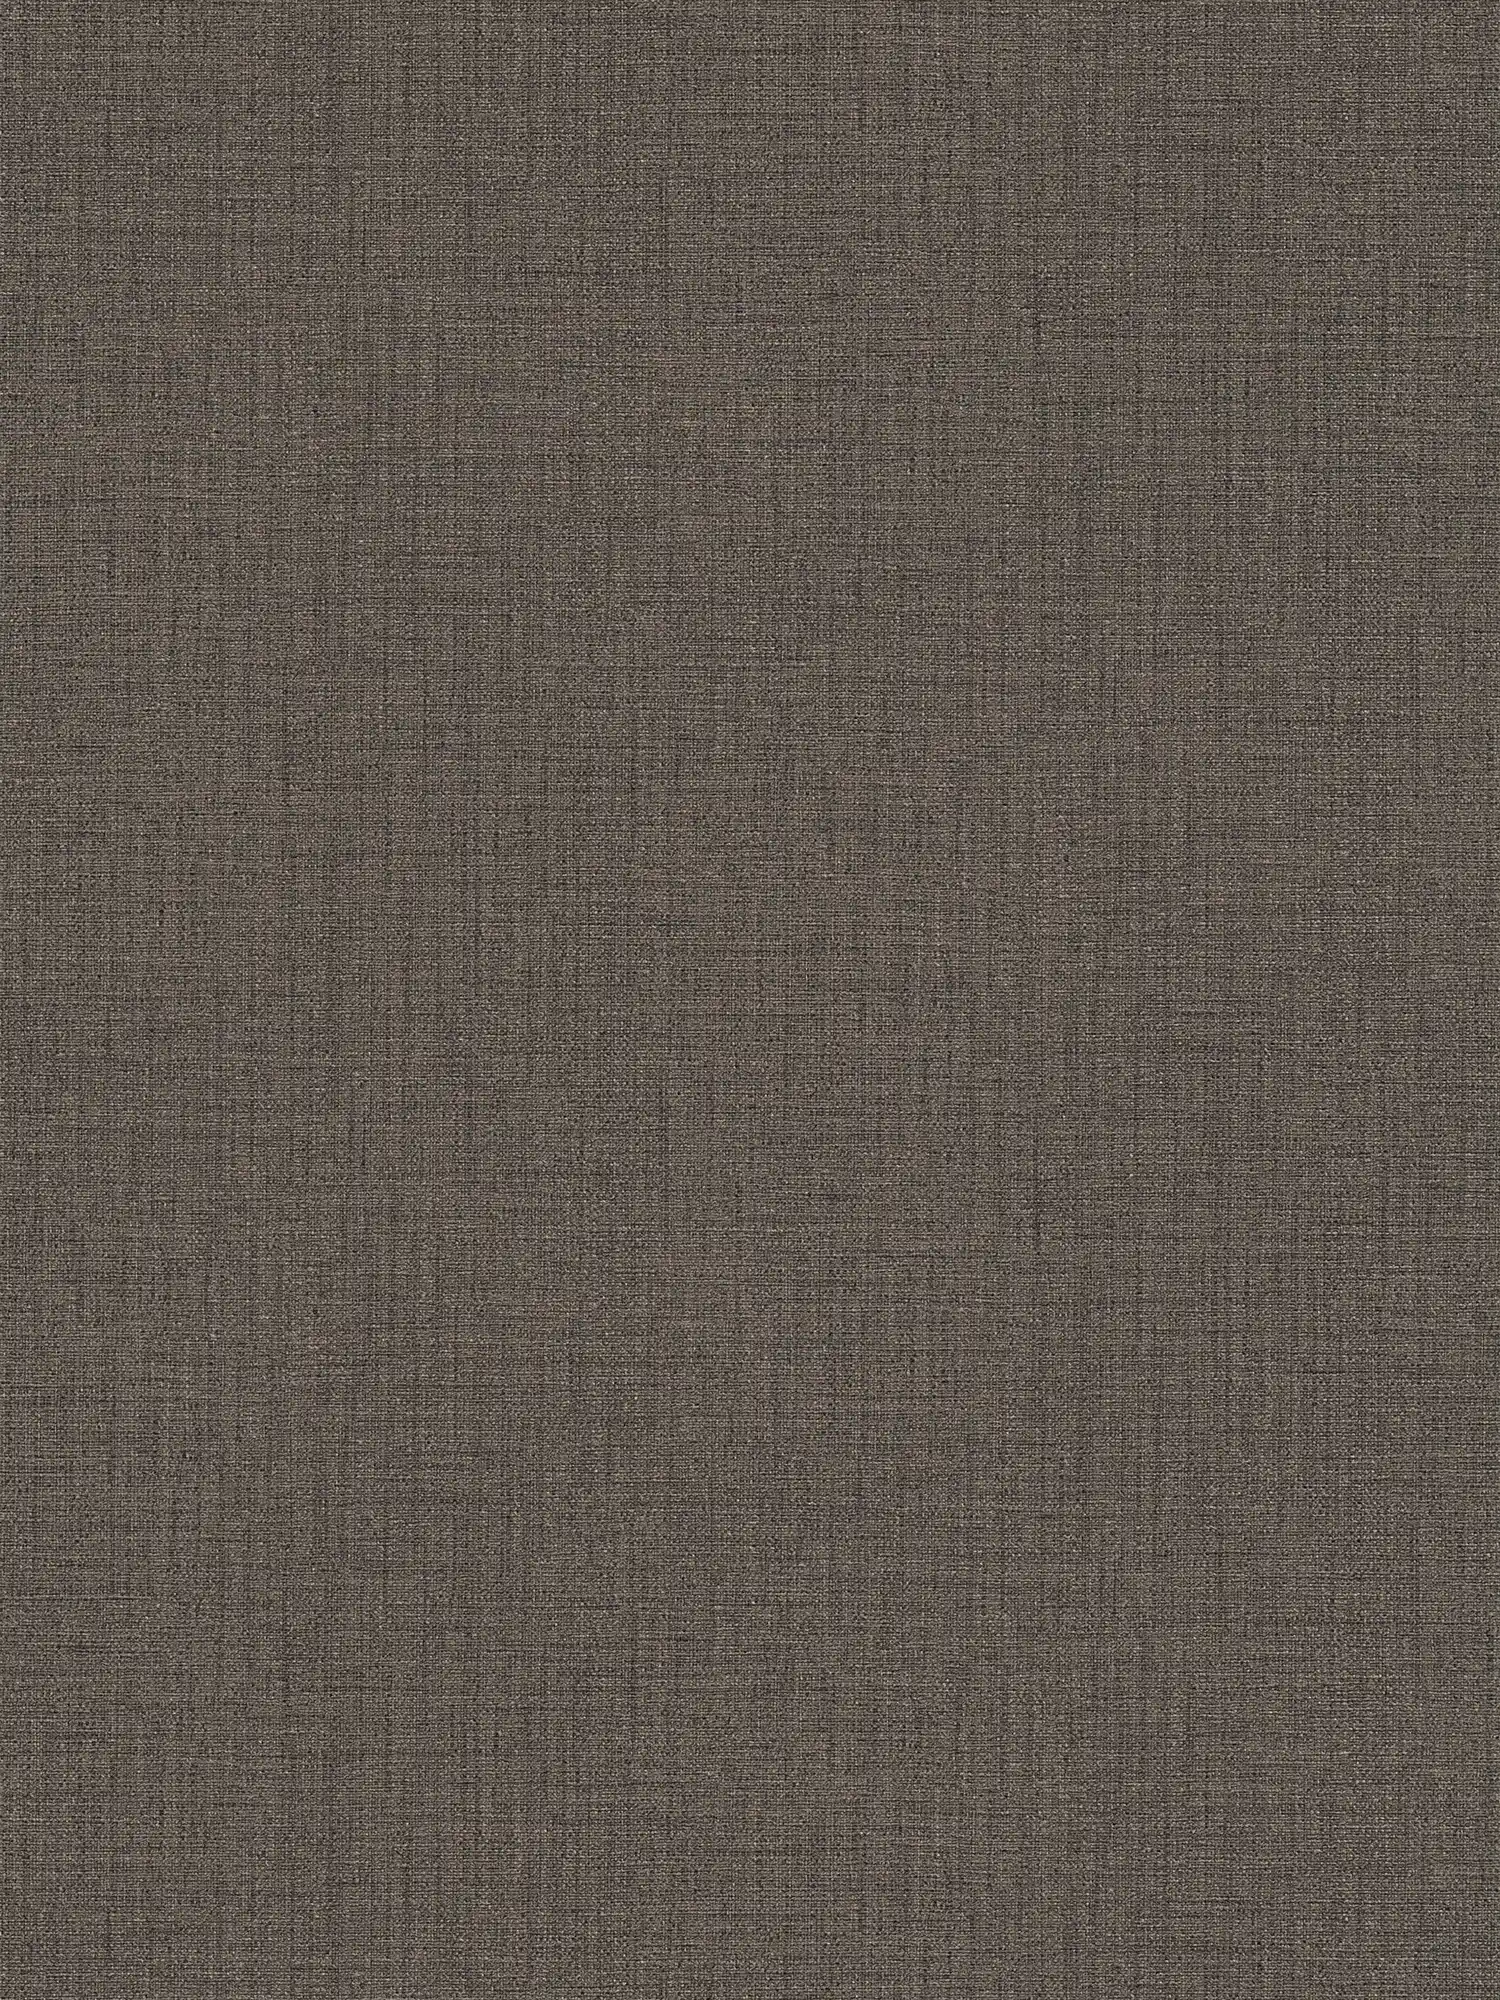 Textile look wallpaper mottled with structure - brown
